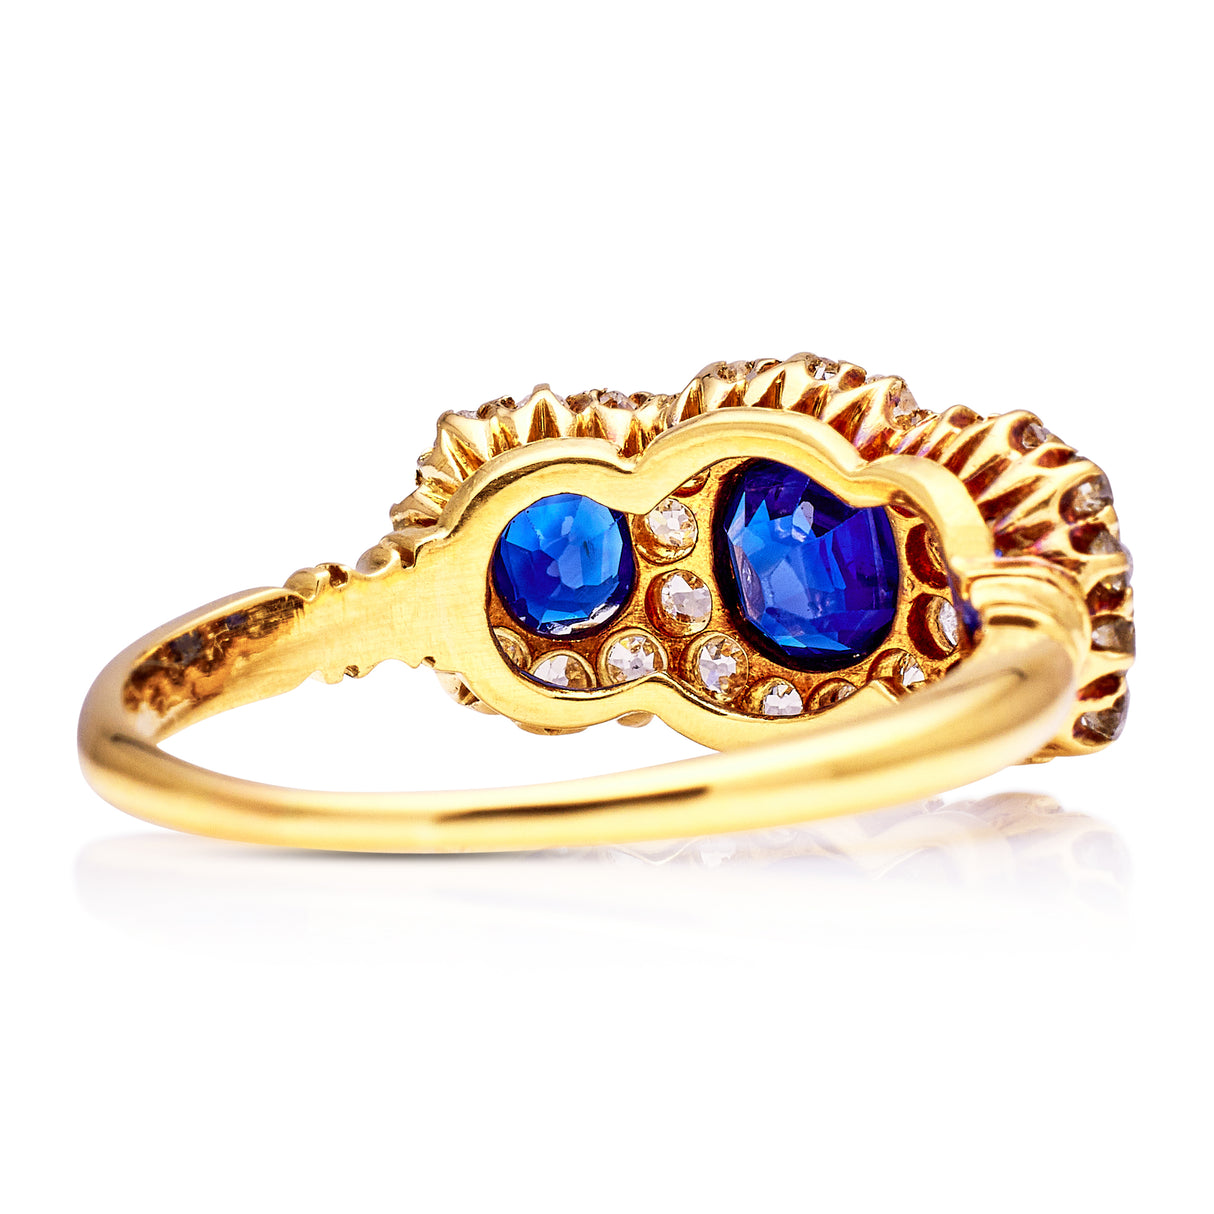 Edwardian, Sapphire and Diamond Triple Cluster Engagement Ring, 18ct Yellow Gold. Back.